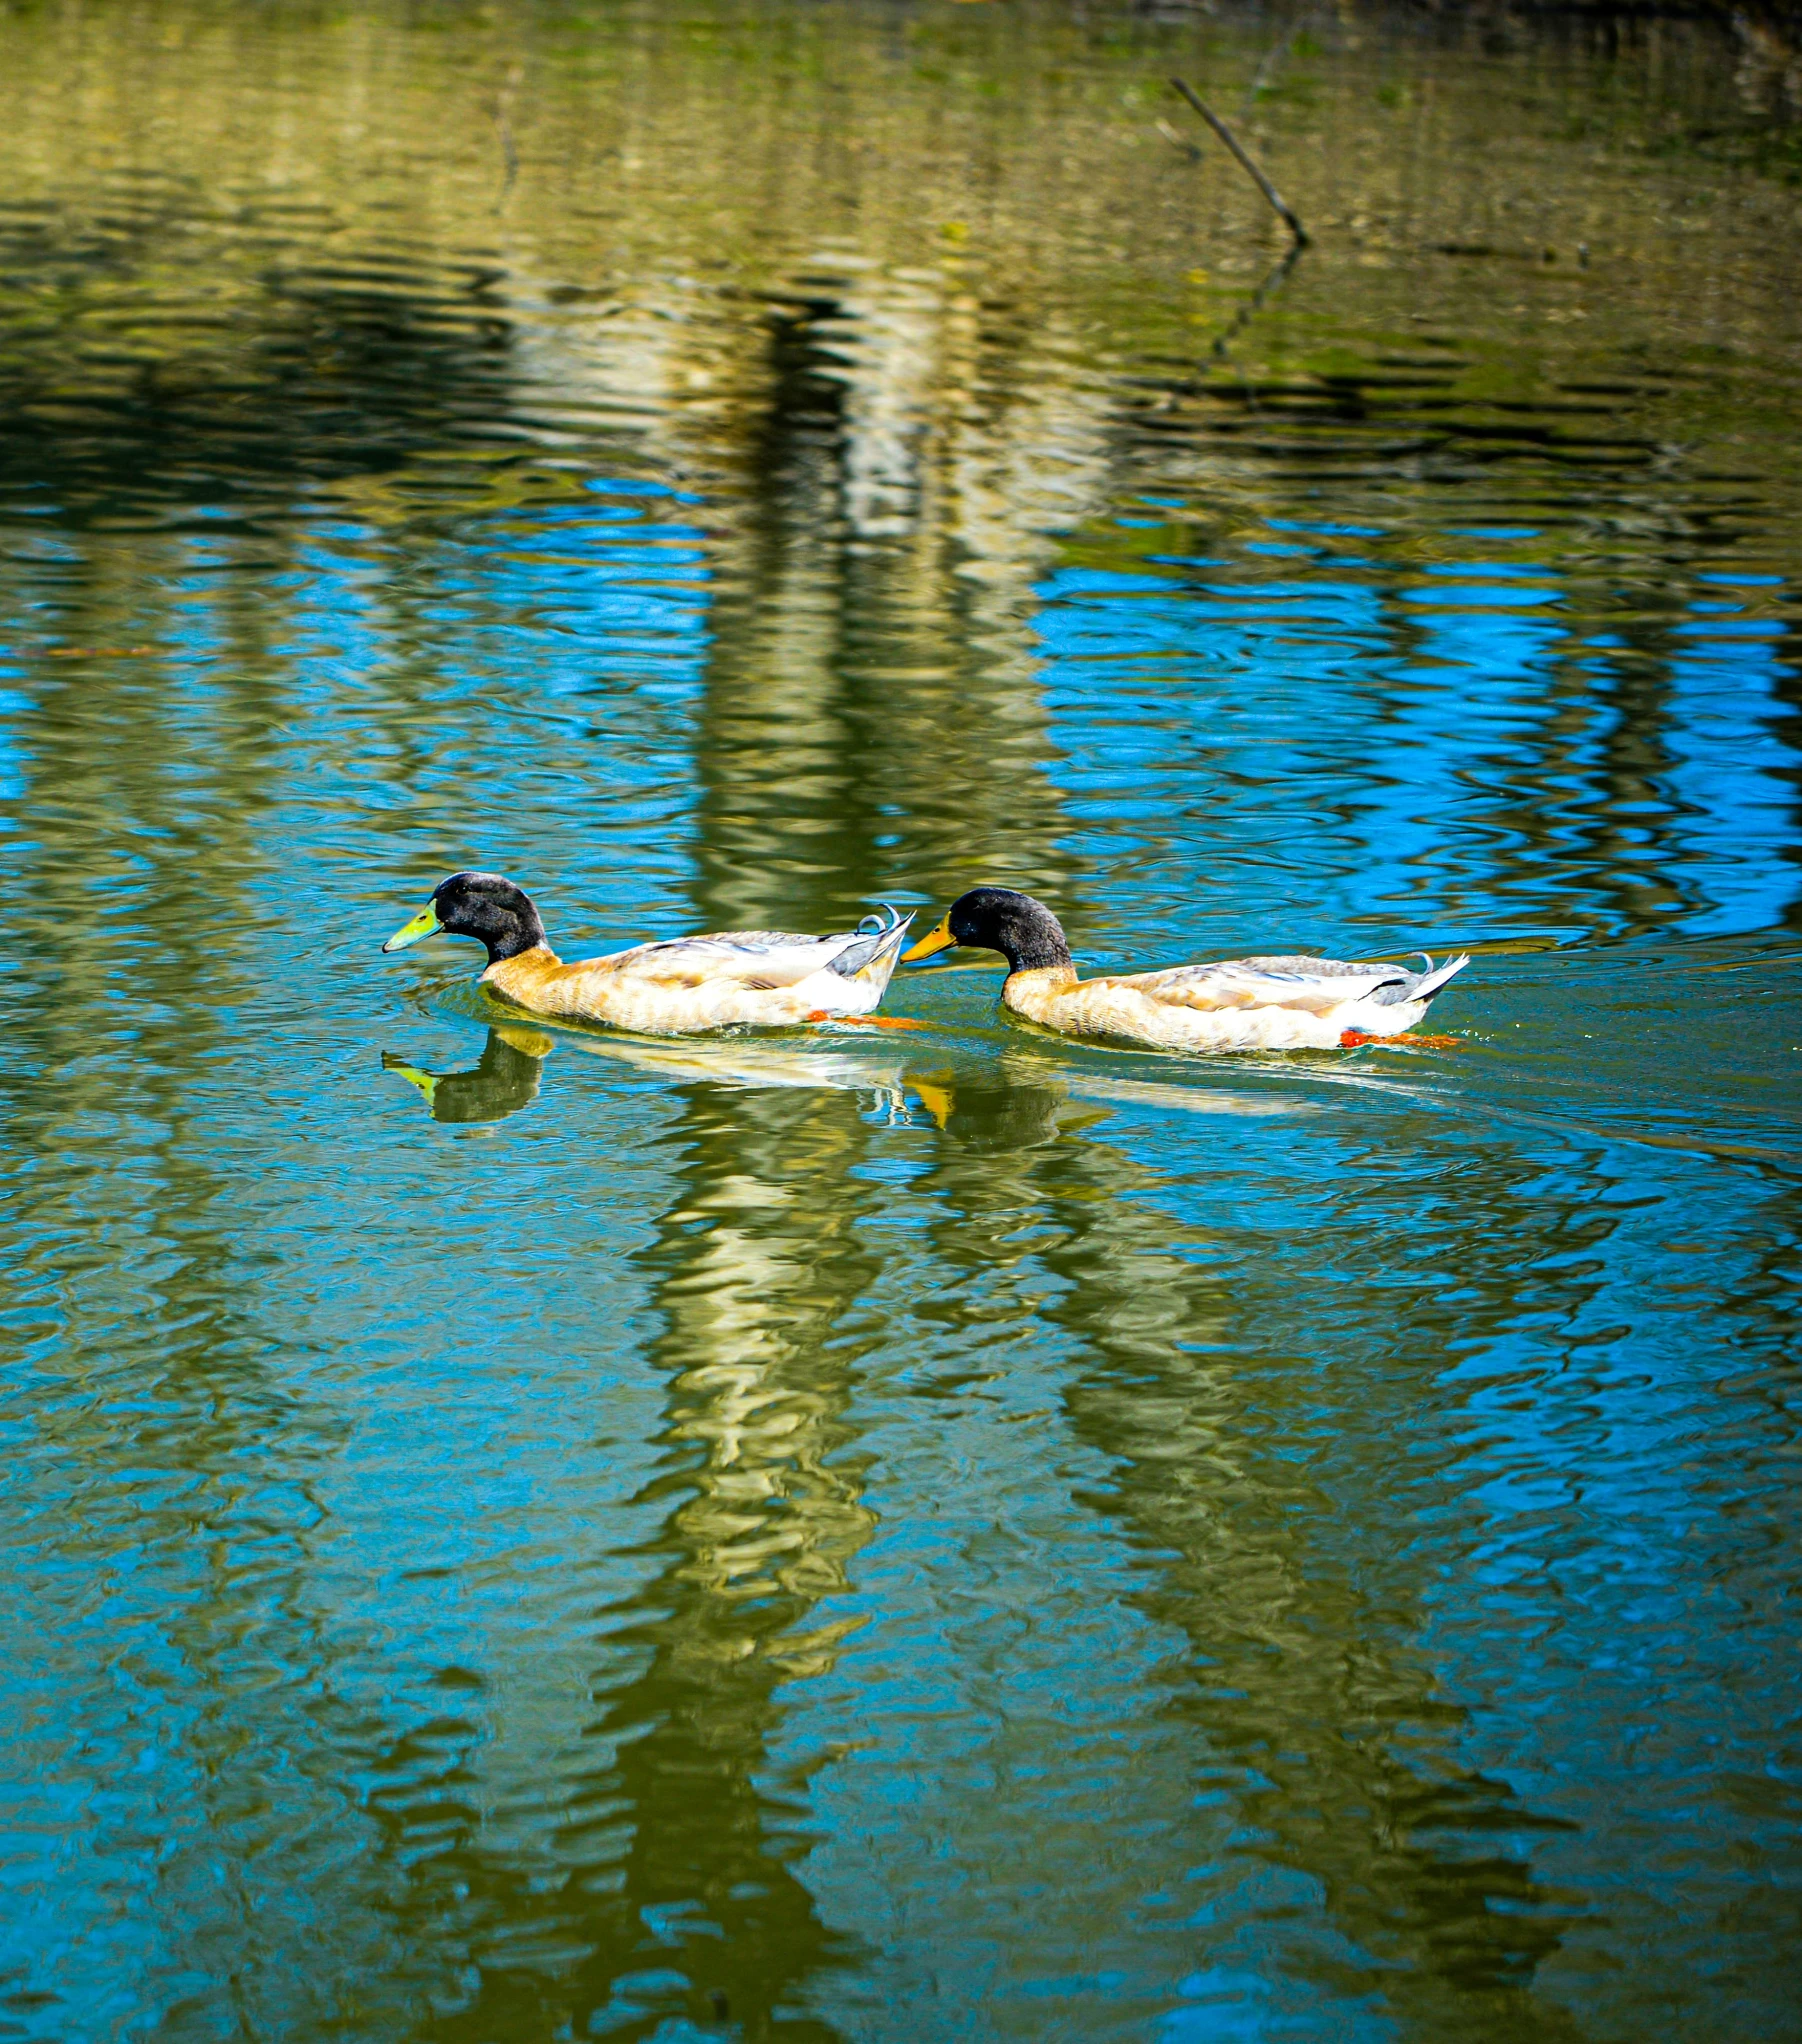 two ducks in the water on top of each other